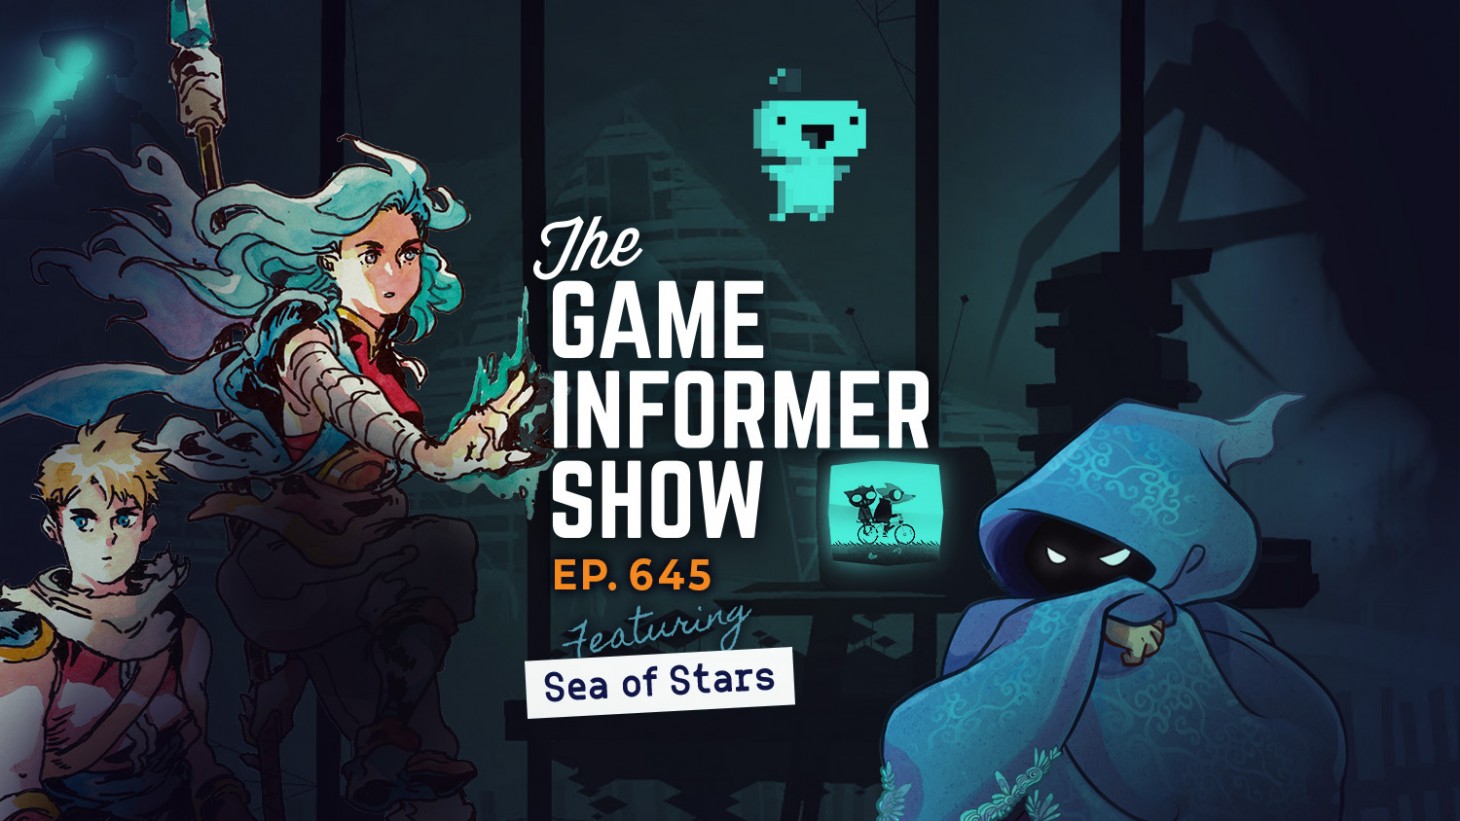 Our All Time Favorite Indies And Sea Of Stars